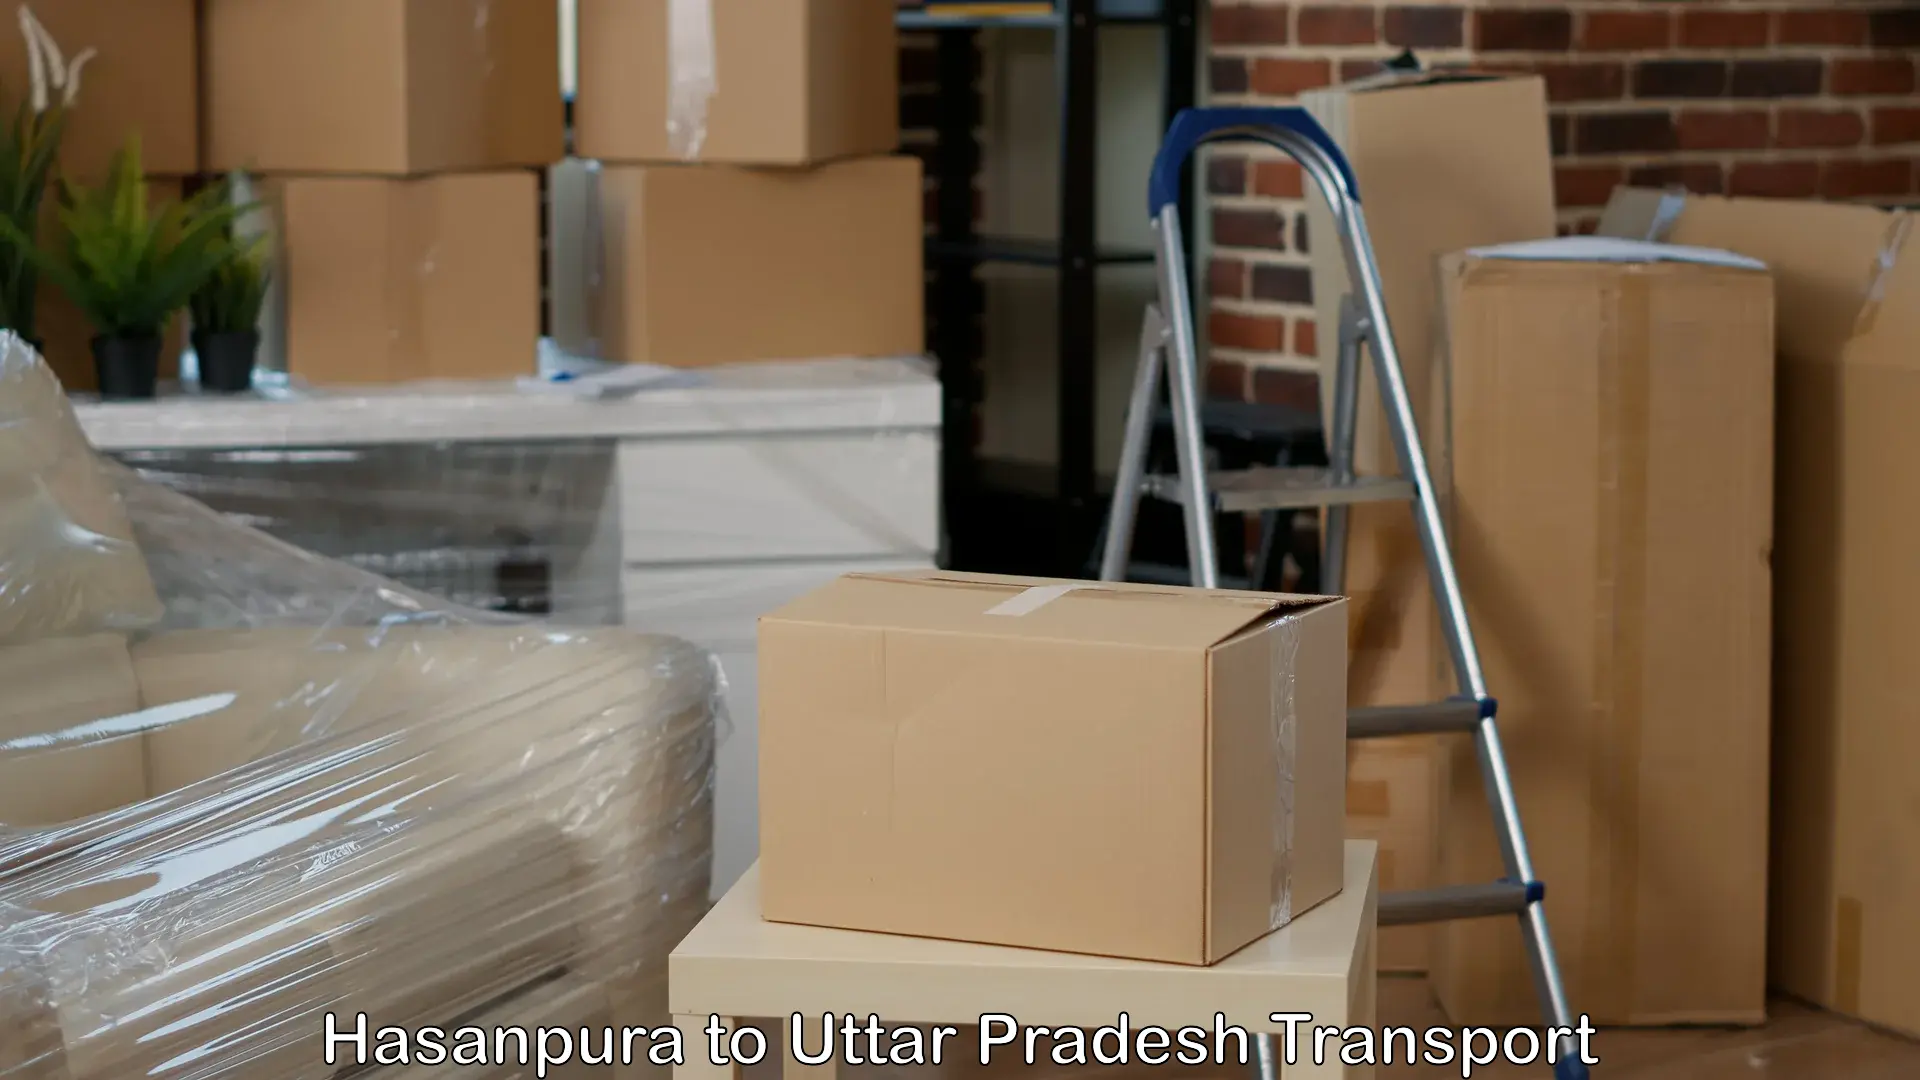 Daily parcel service transport Hasanpura to Sikandara